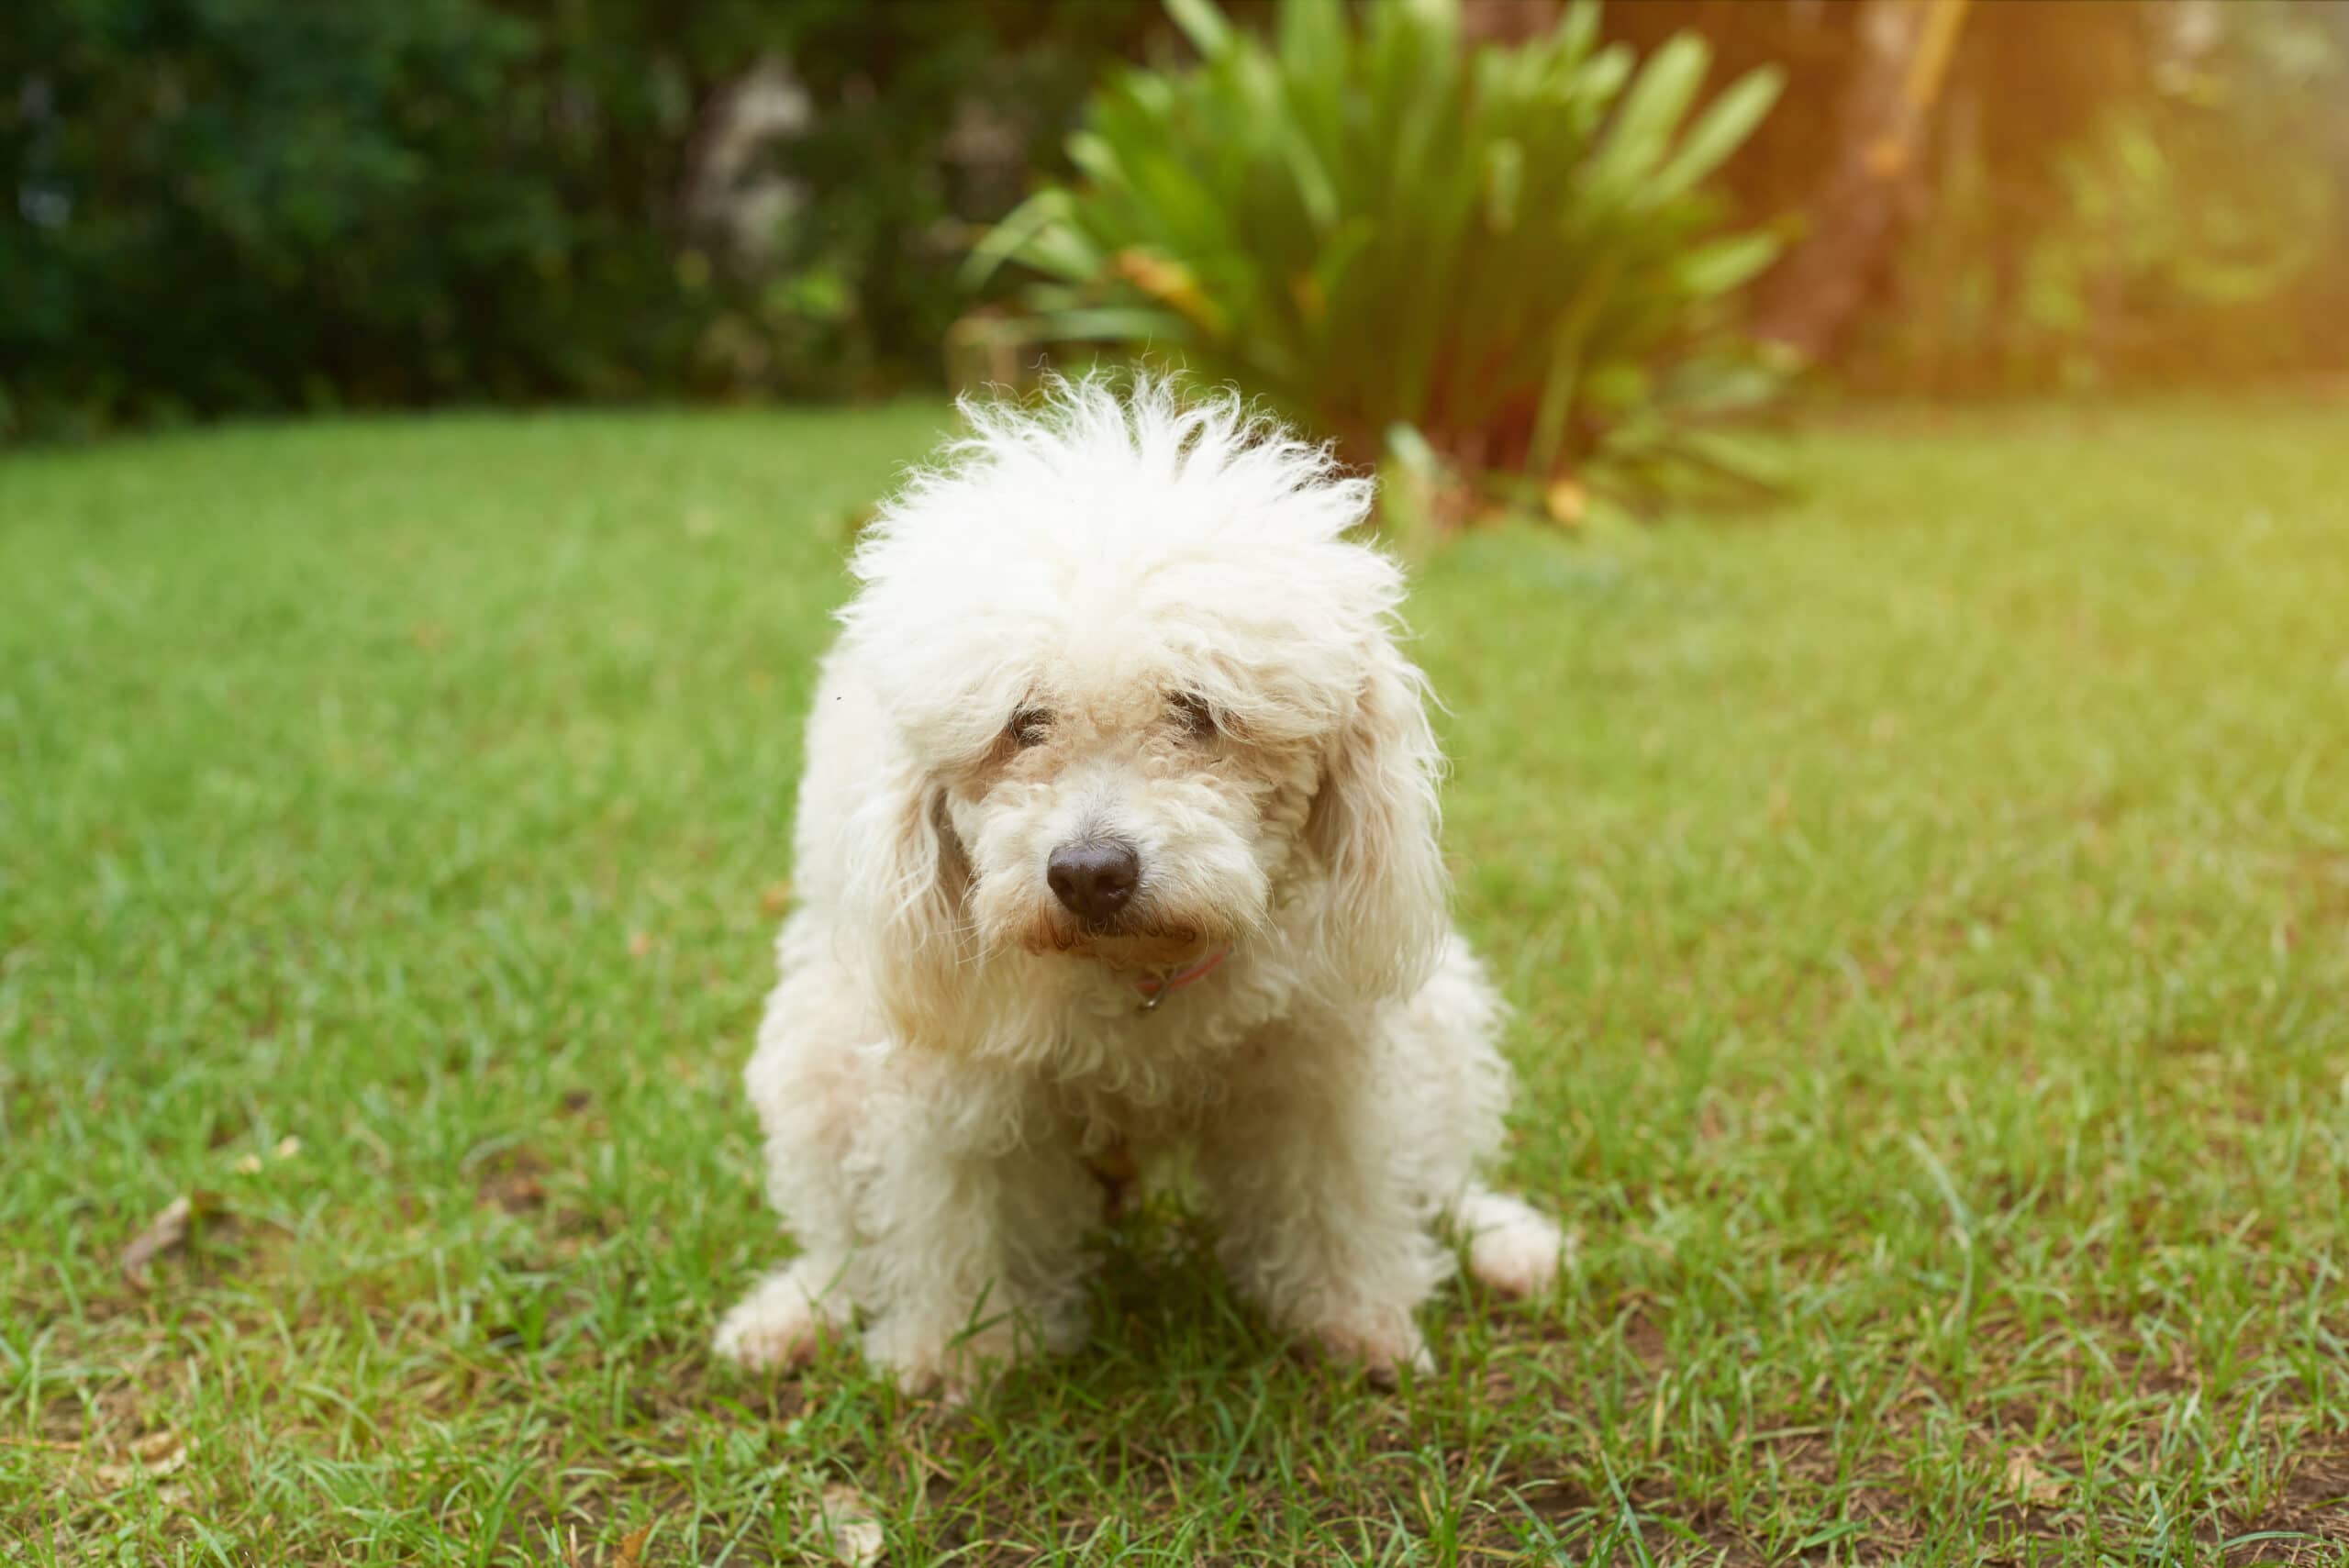 How to stop a dog from pooping in my yard? 17 tips